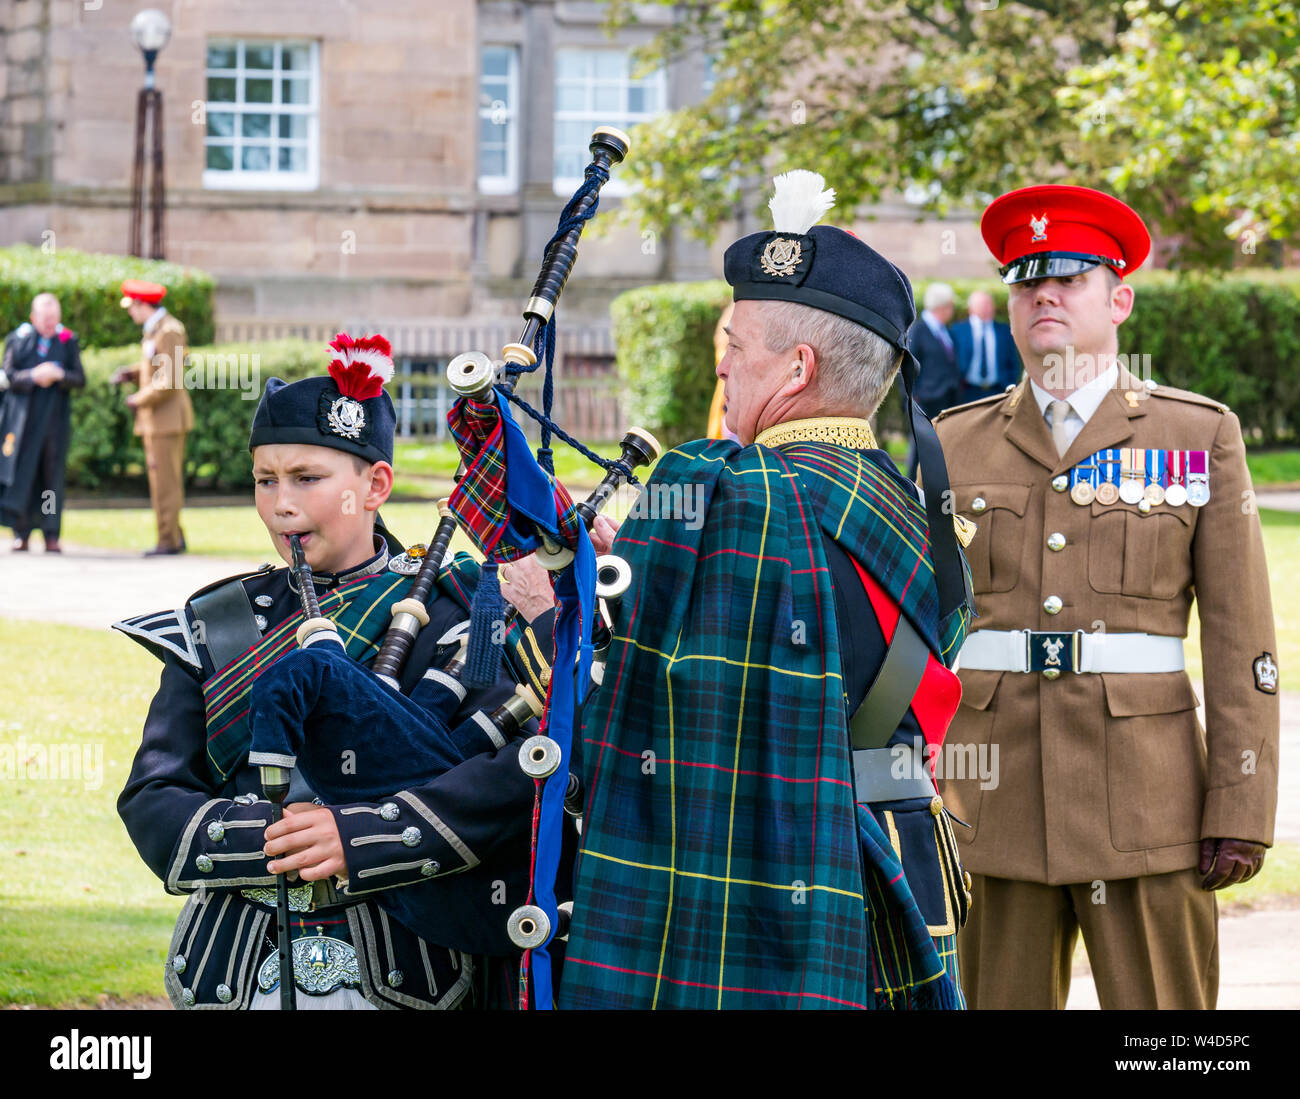 A boy and man in Scottish fromal dress tune bagpipes before ceremony, Dunbar, East Lothian, Scotland, UK Stock Photo